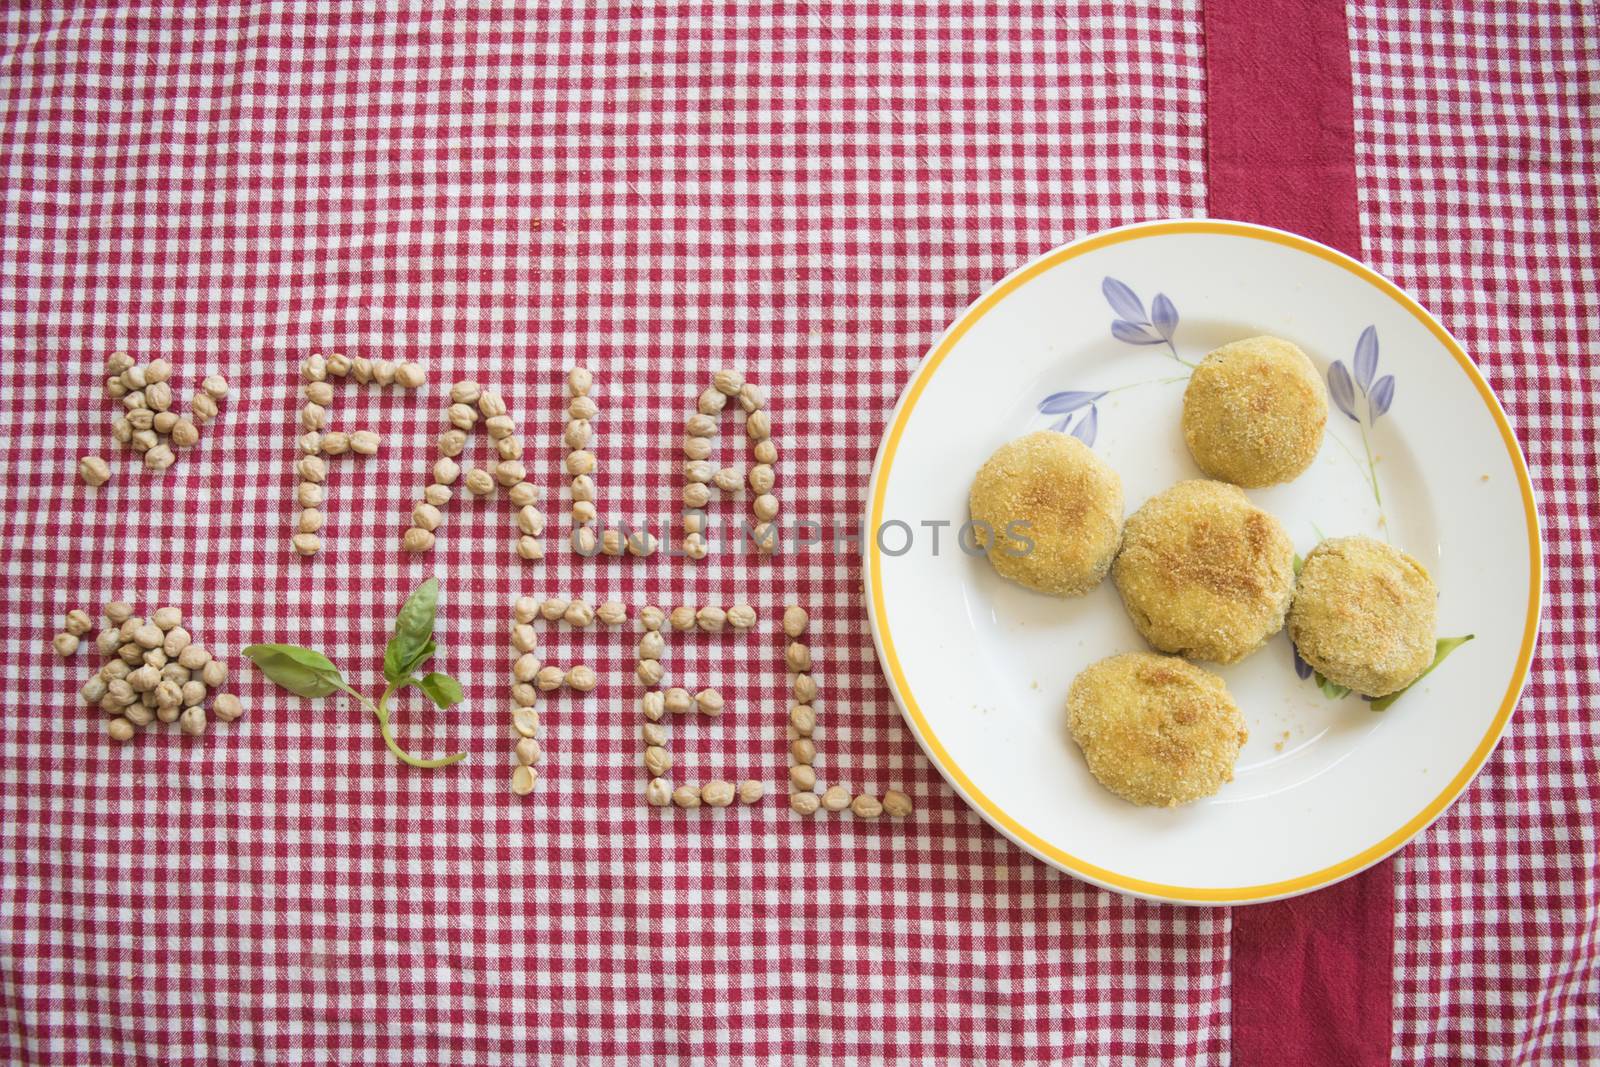 fried vegetarian falafel with near its written made with chickpeas